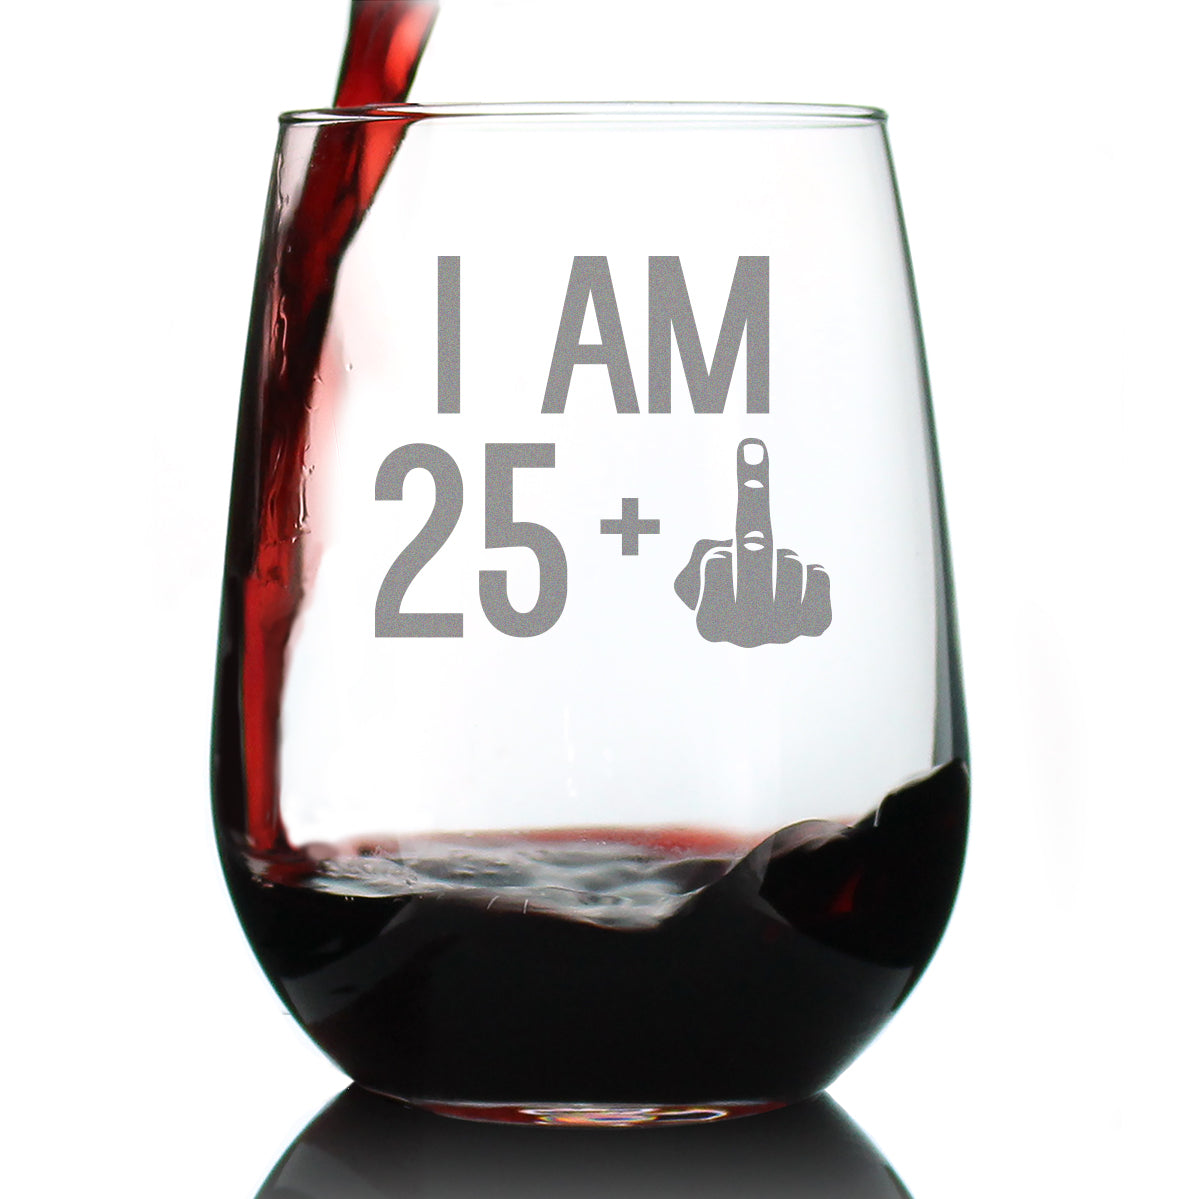 I Am 25 + 1 Middle Finger Funny Stemless Wine Glass, Large 17 Ounce Size, Etched Sayings, 26th Birthday Gift for Women Turning 26